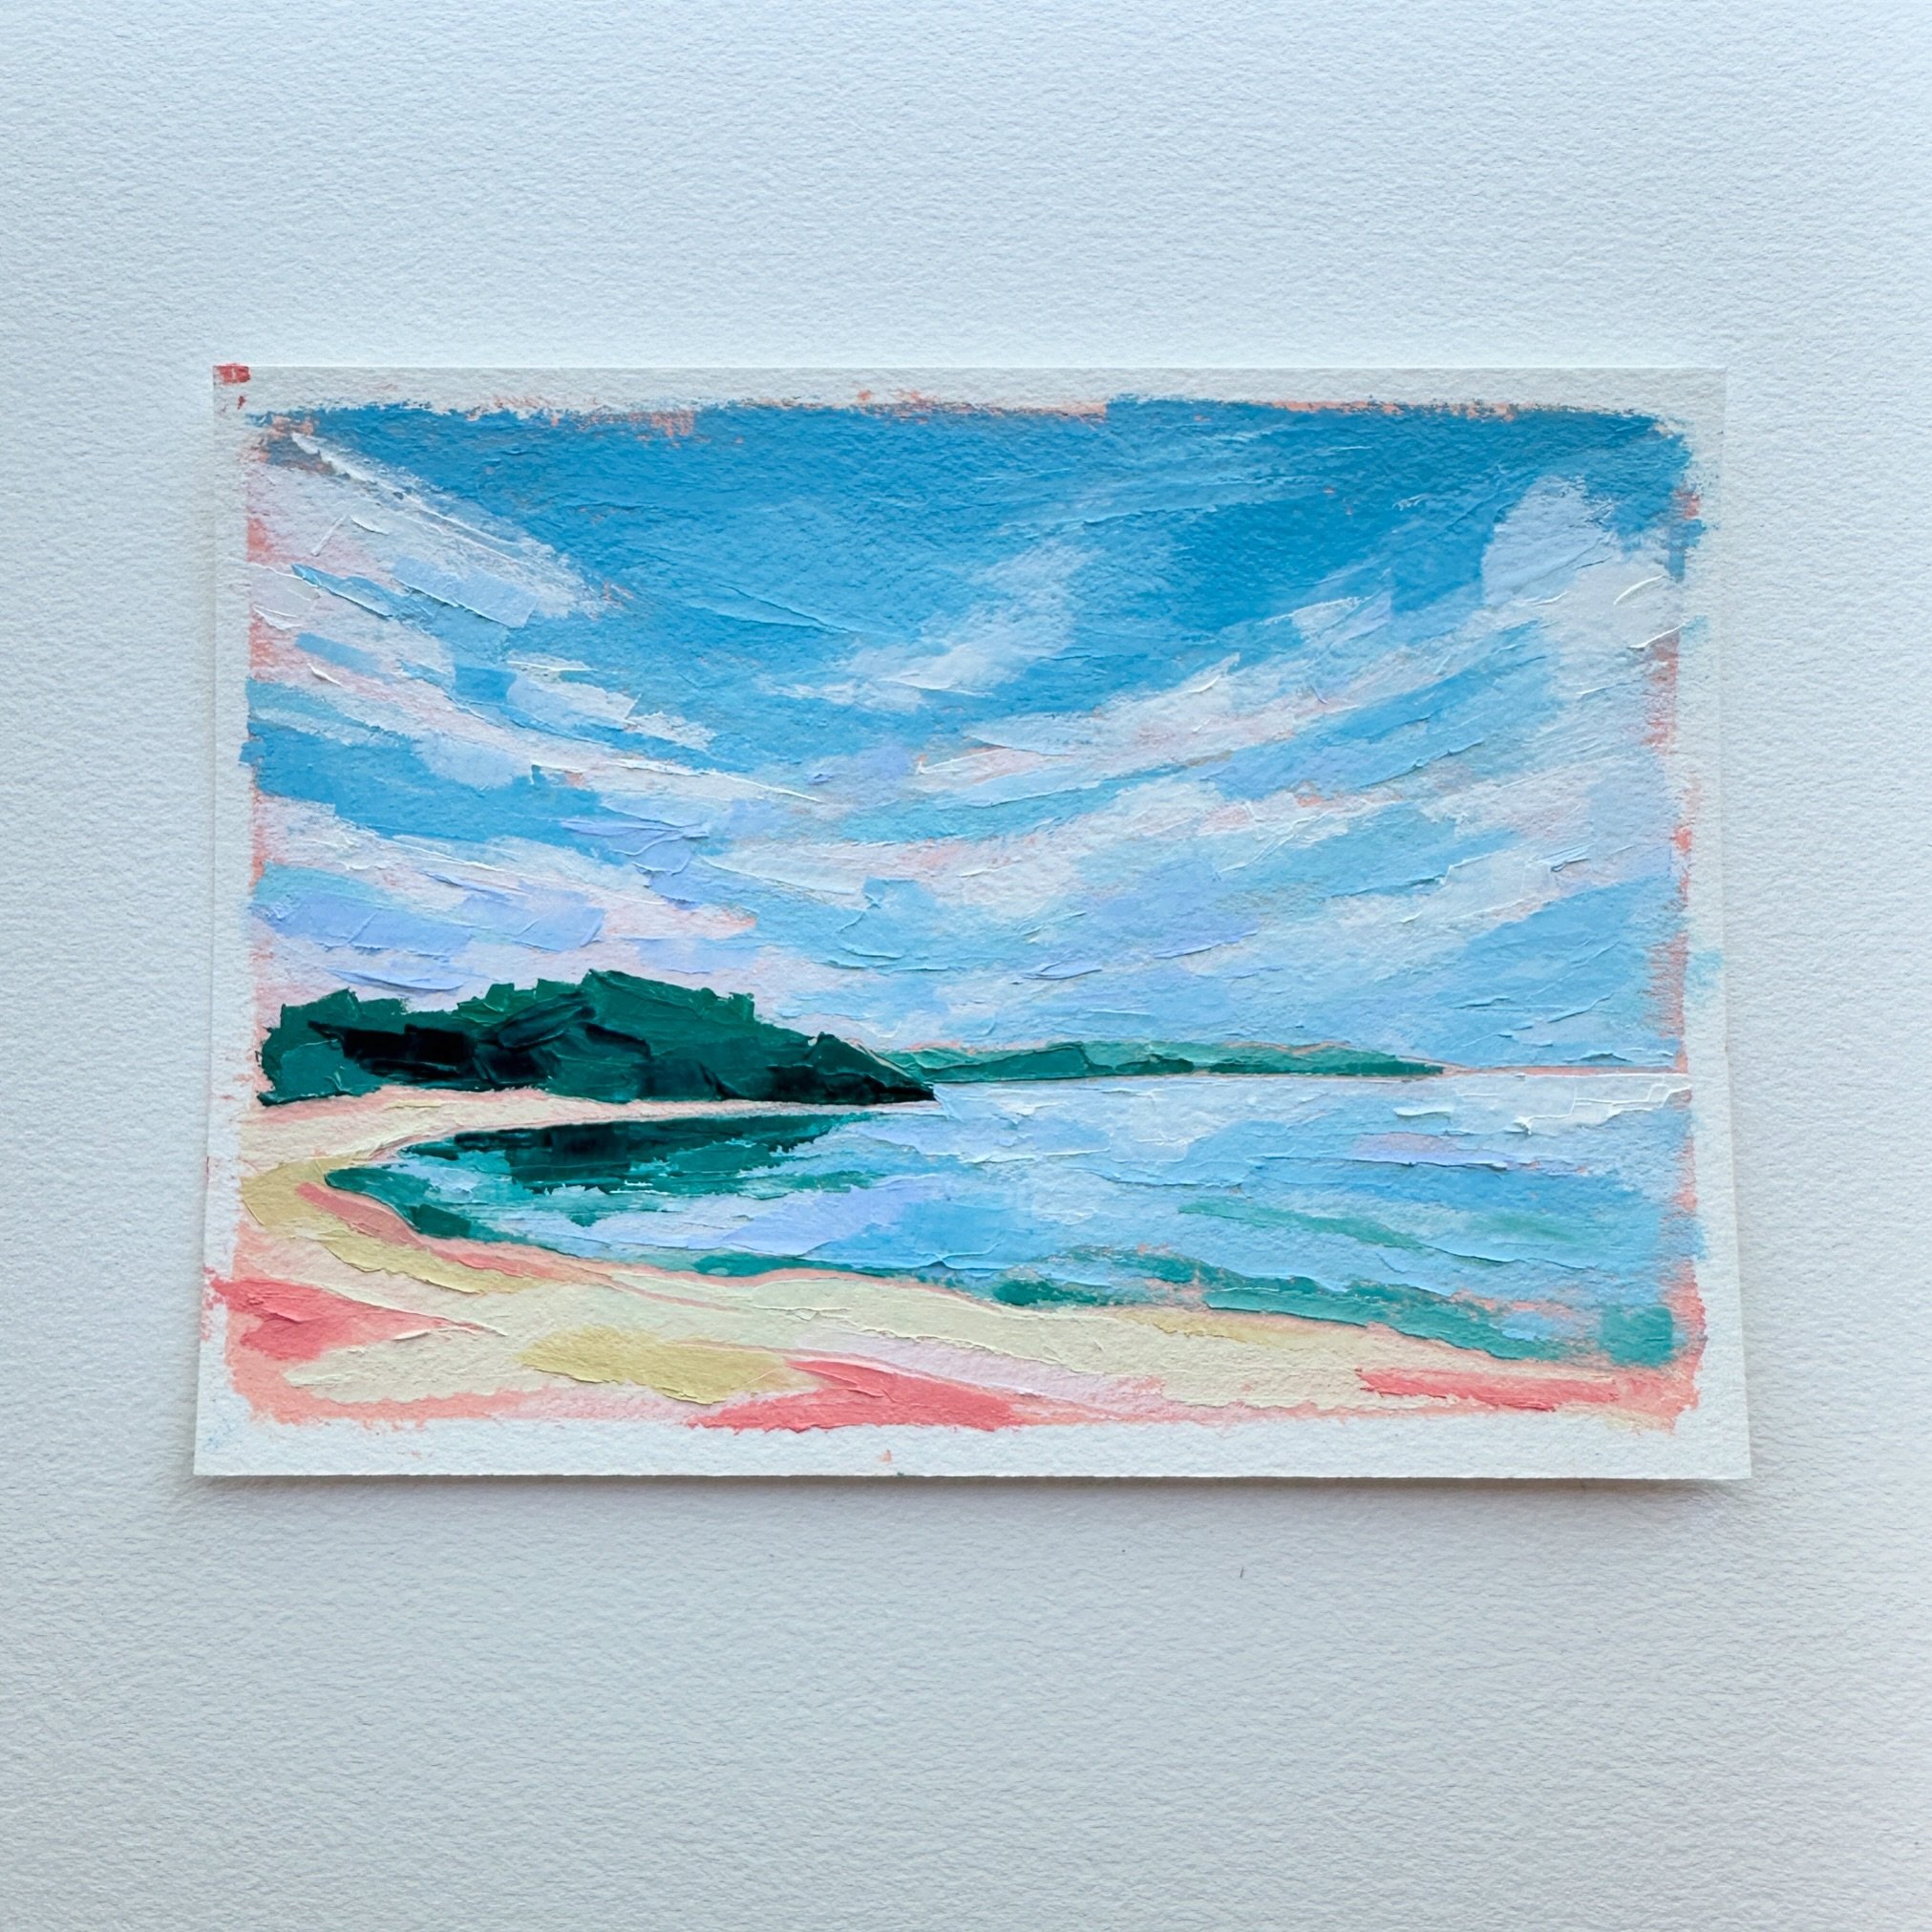 Day 63, The 100 Day Project 2024 @dothe100dayproject

Van&rsquo;s Beach . Another peaceful view from the opposite direction of Van&rsquo;s Beach. For days 61-70 of my 100 Day Project, I&rsquo;ll be painting little studies for my bigger &ldquo;Happy P